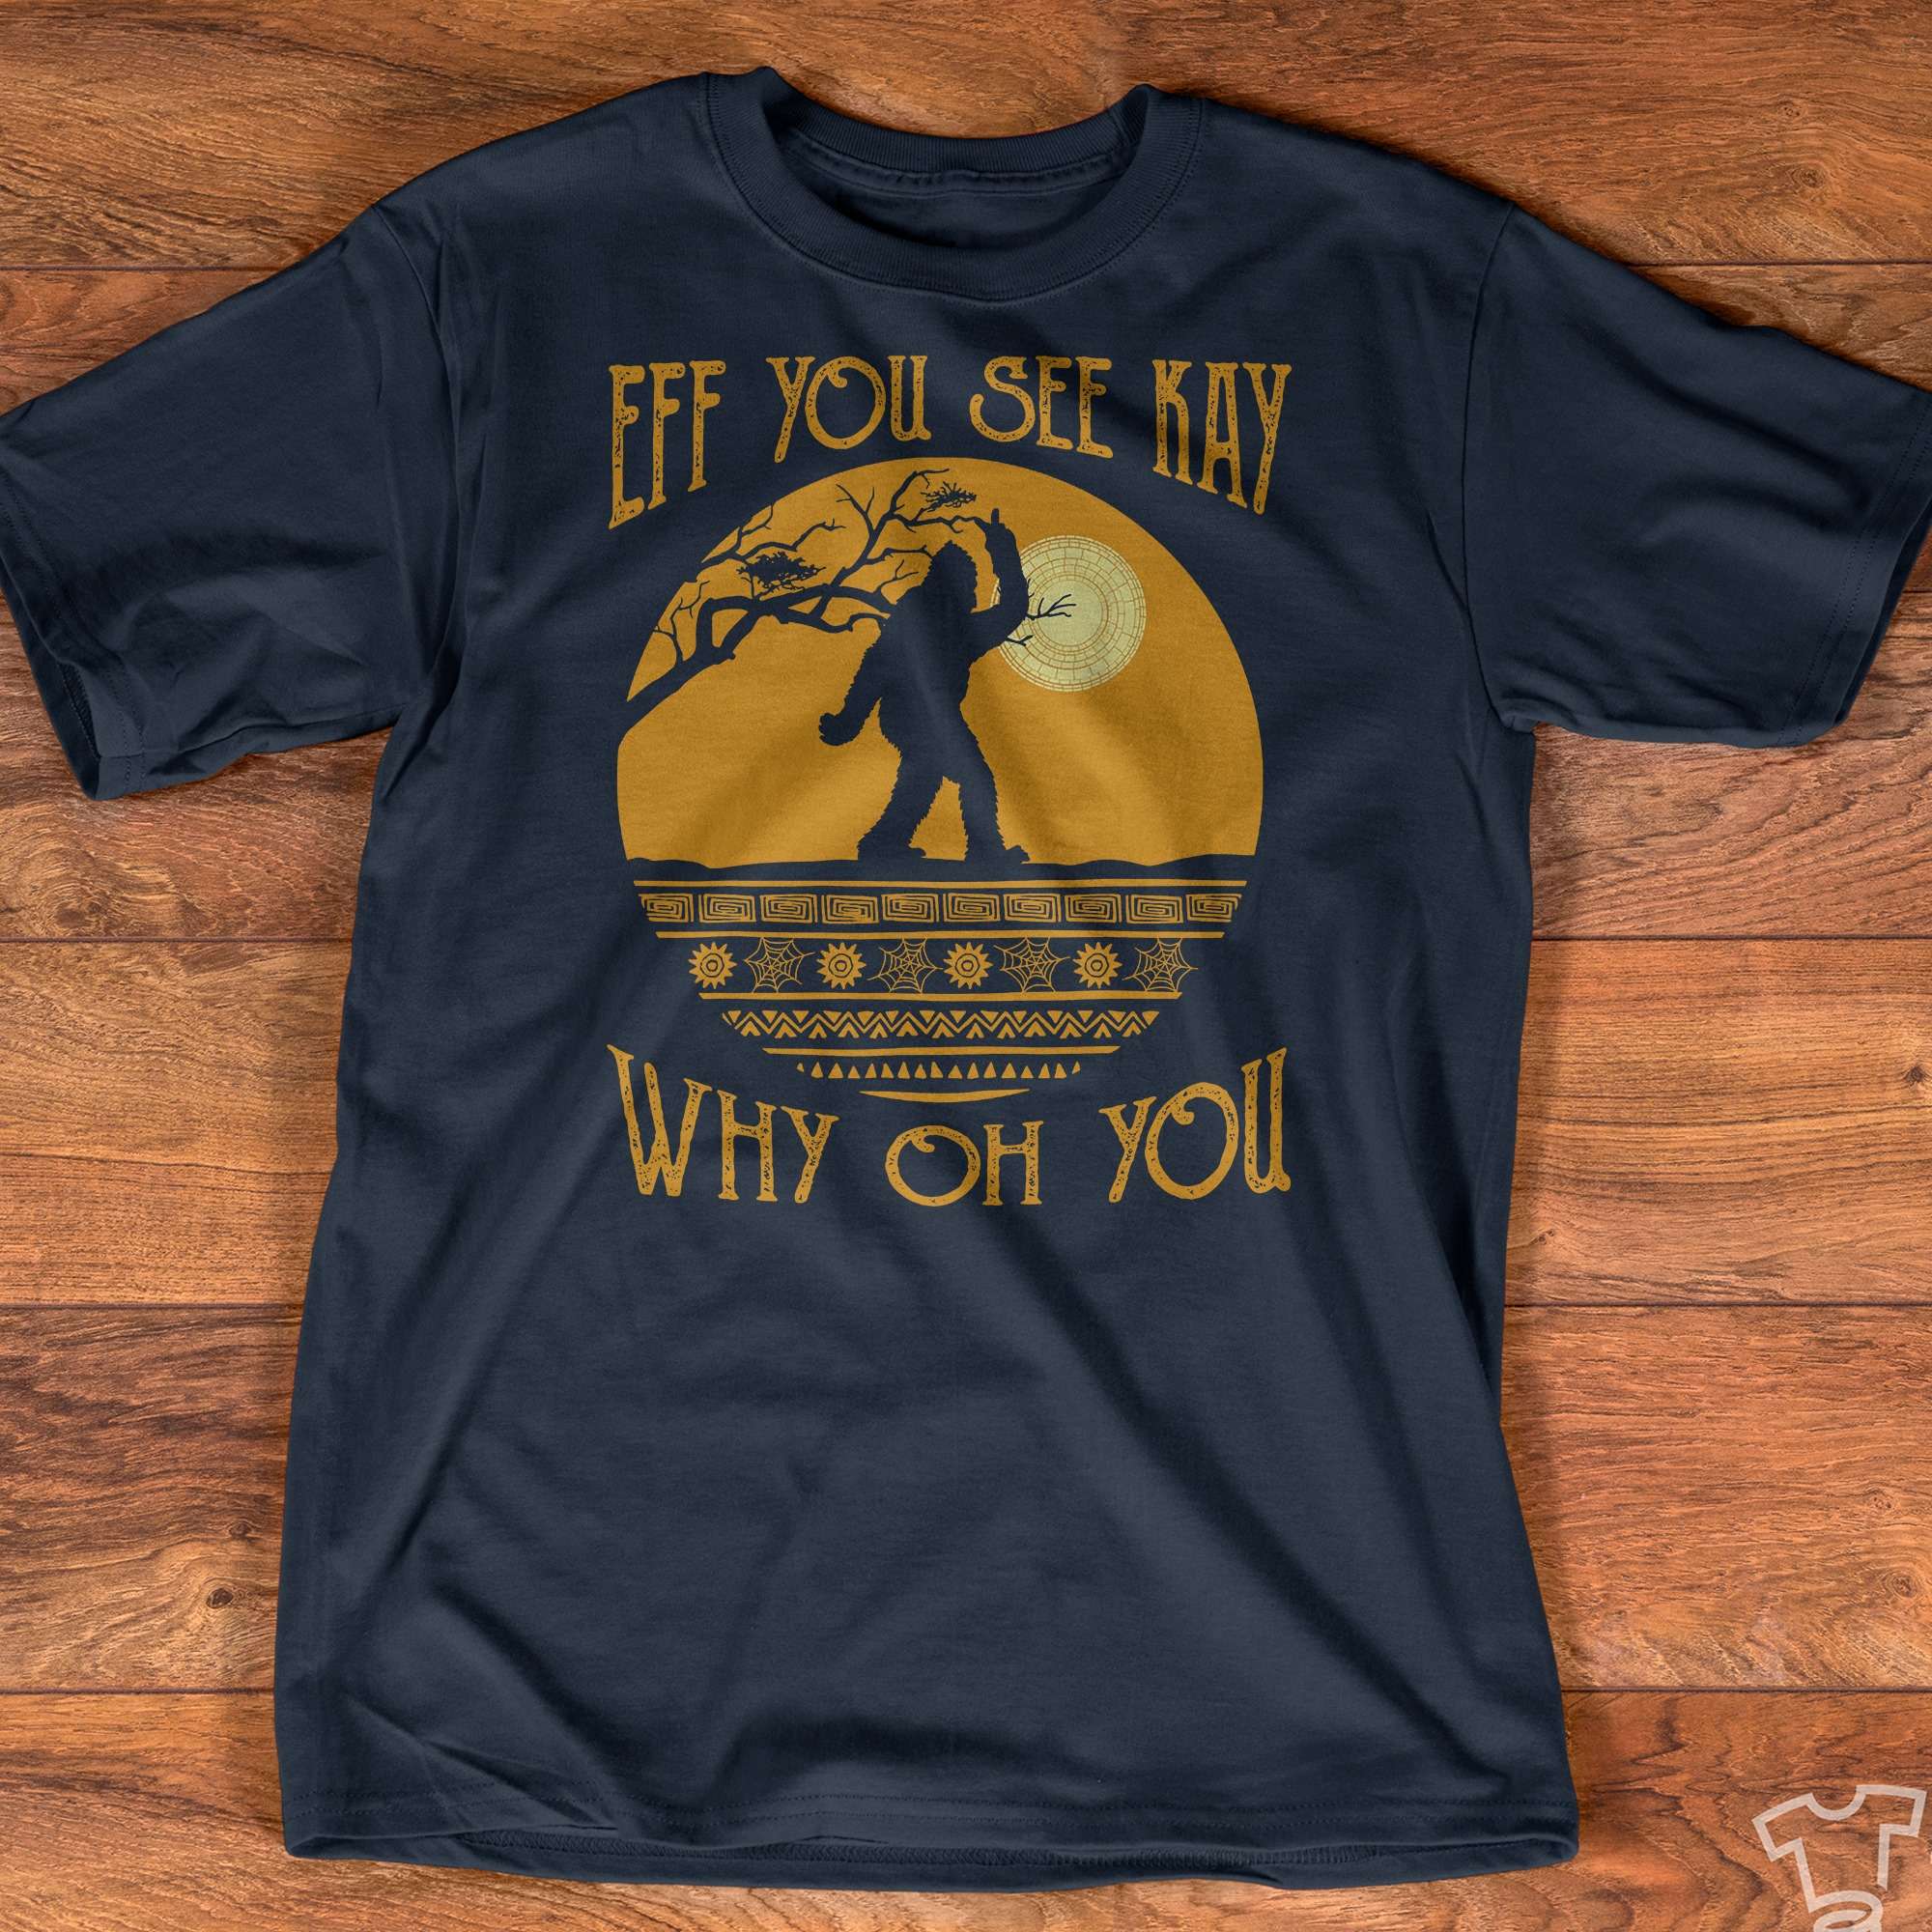 Eff you see kay, why oh you - Funny big foot T-shirt